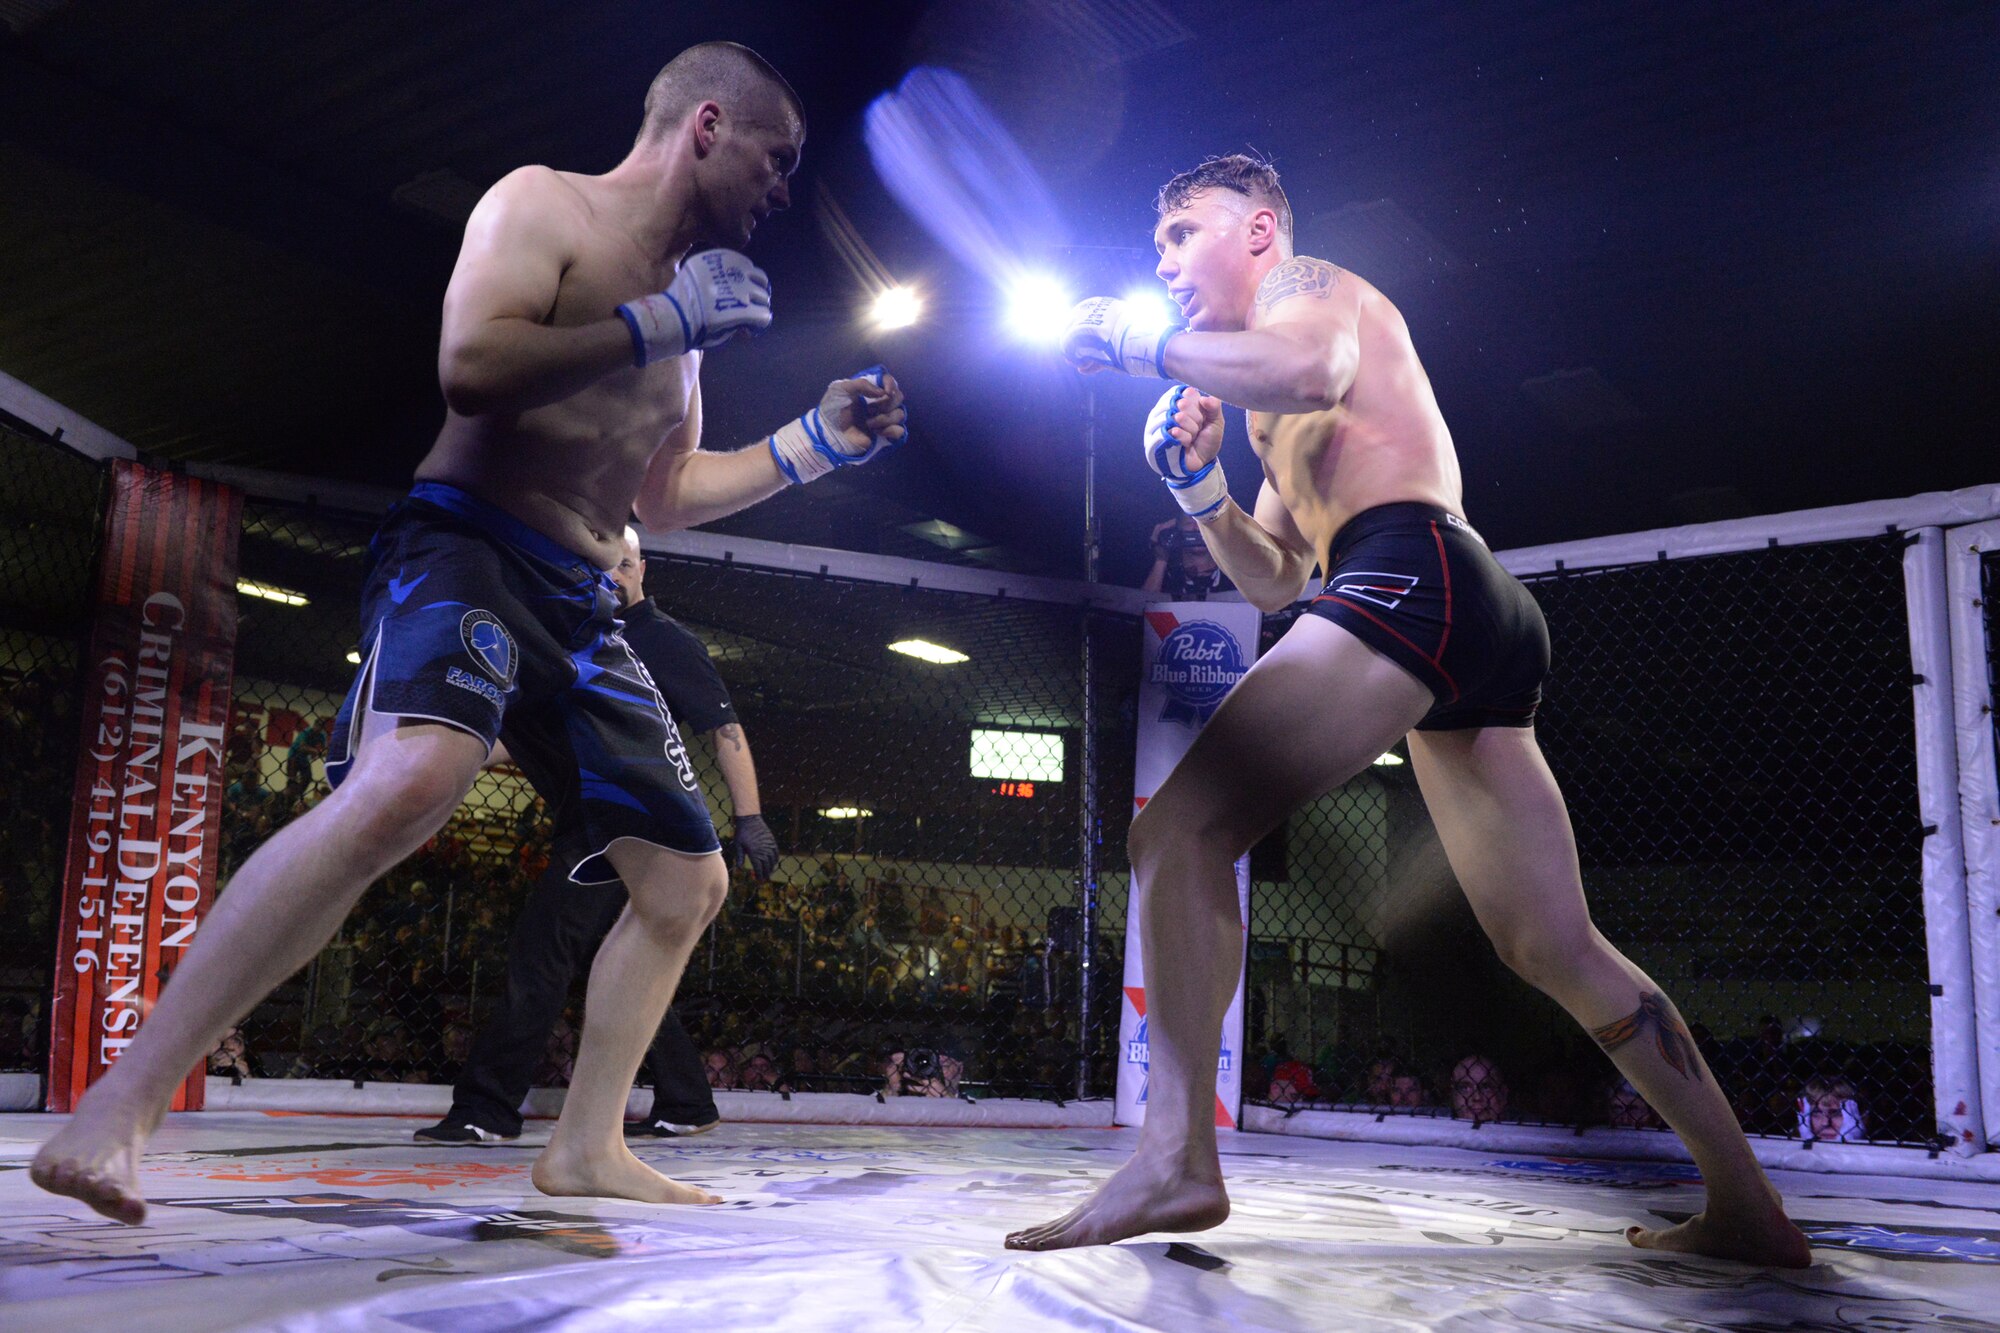 Senior Airman Michael Bullen, of the 119th Security Forces Squadron, right, faces off with his opponent during his mixed martial arts fight in the center stage fighting cage at the Freeman Arena, Detroit Lakes, Minnesota, May 16, 2015. The security forces Airman uses mixed martial arts training and fighting to enhance his fitness and skills to be better prepared in his career field and to be better prepared for potential threats on duty.  (U.S. Air National Guard photo by Senior Master Sgt. David H. Lipp/Released)